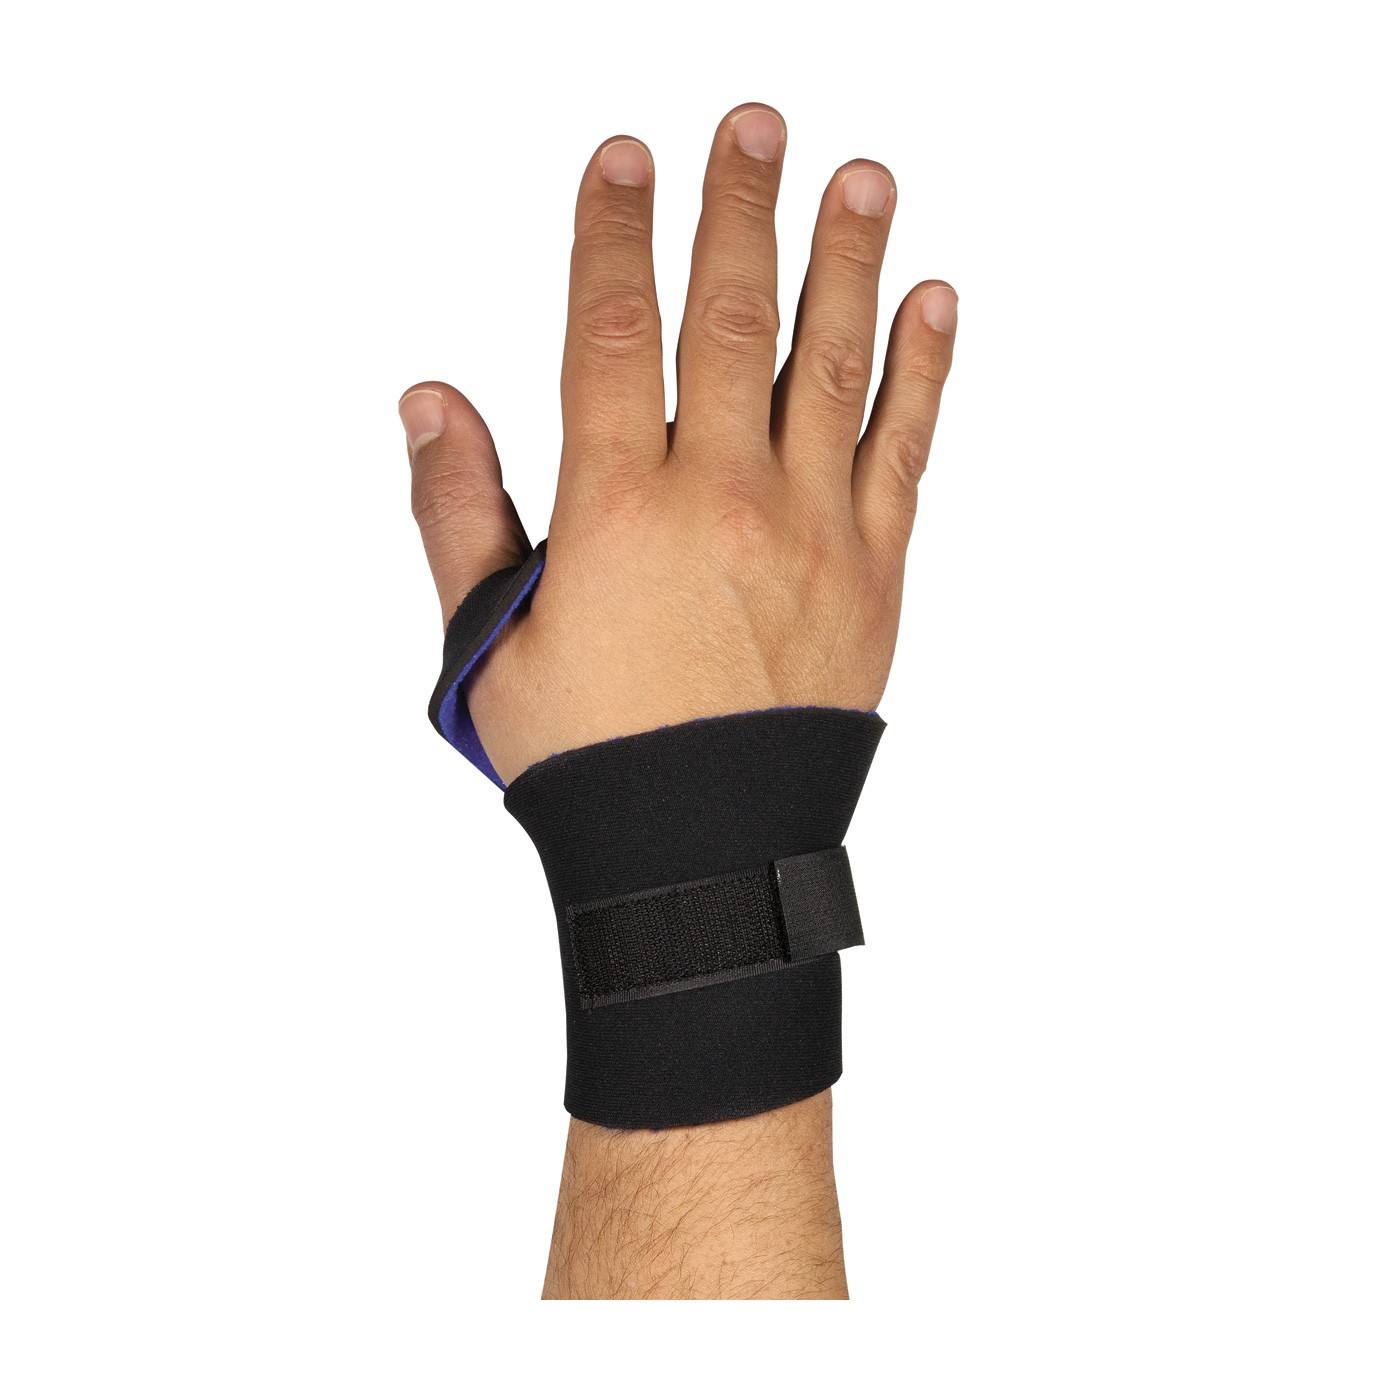 Wrist Support, Light Neoprene with Punched Thumb Loop, OSFM, Black